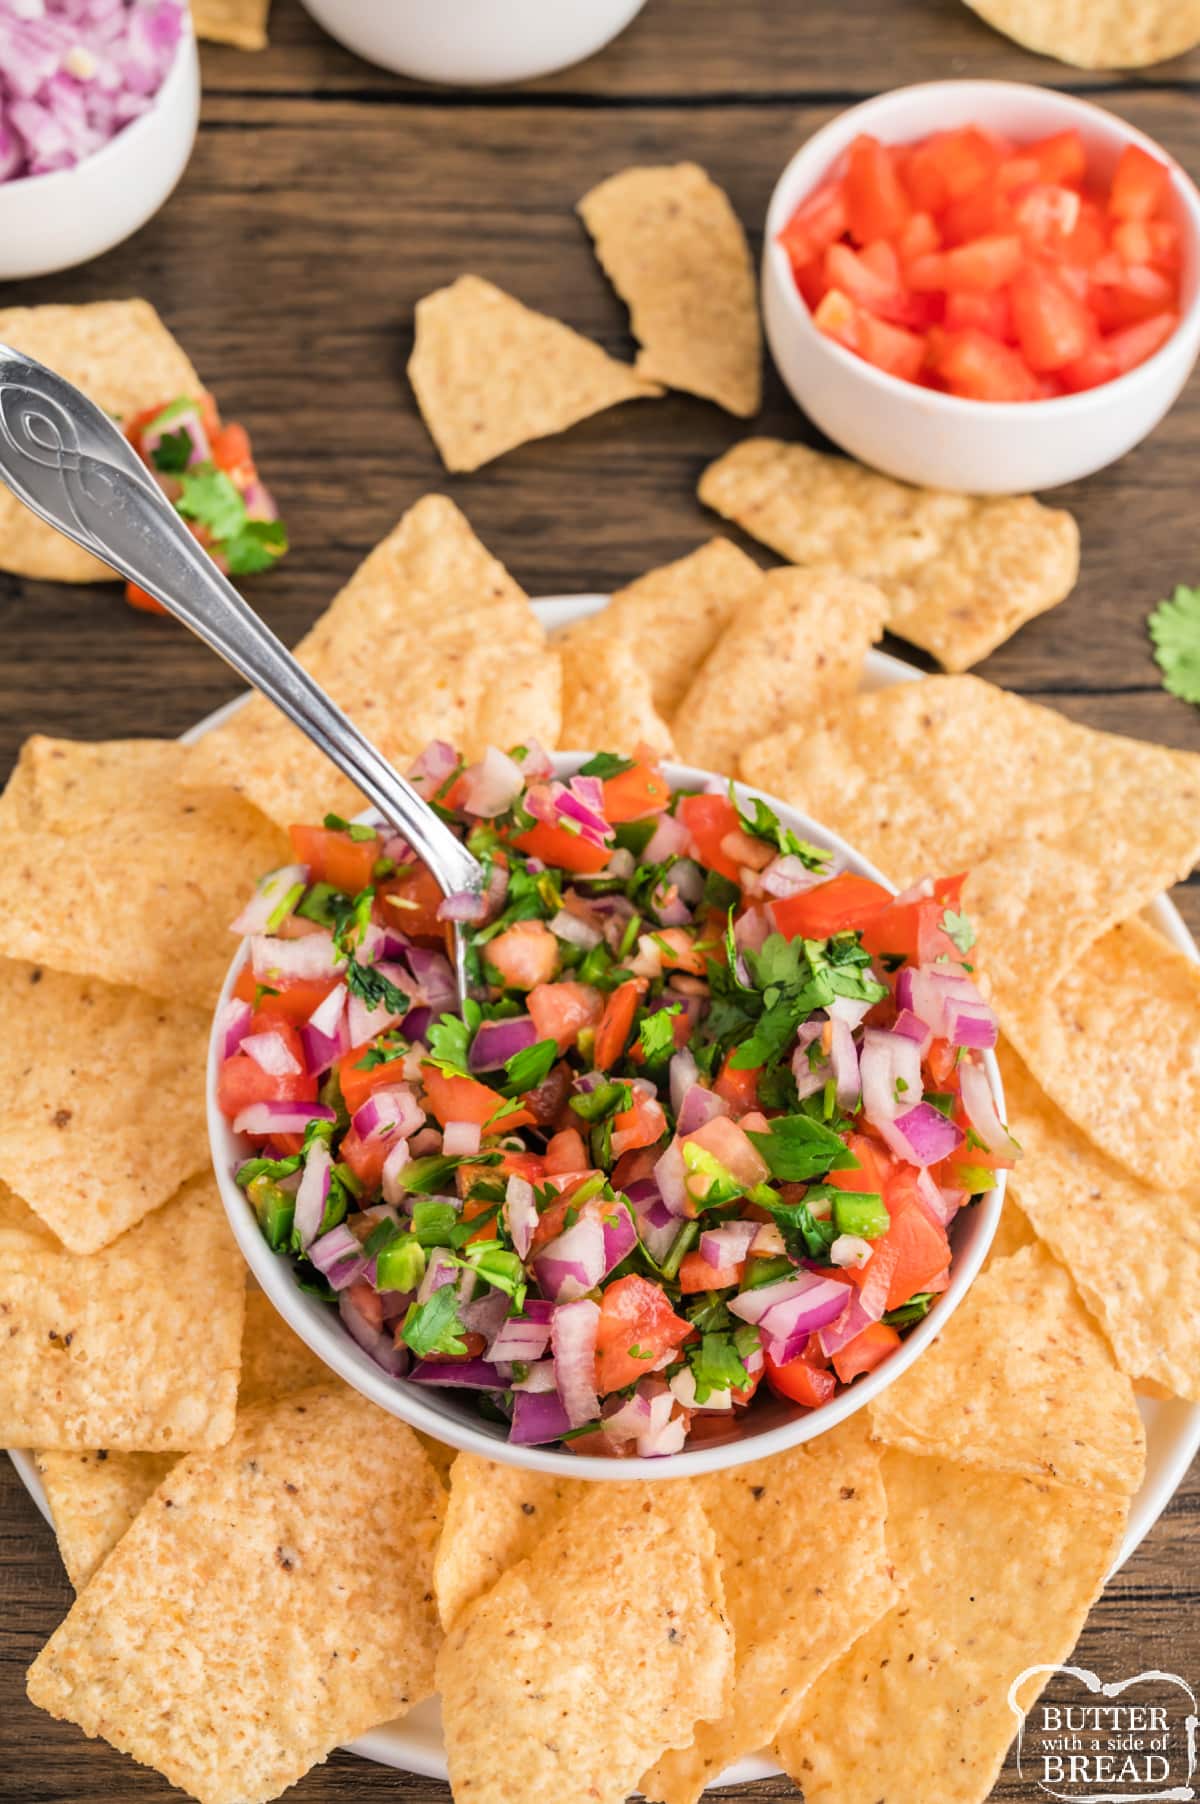 Chip dip made with tomatoes, onions, cilantro, garlic, and lime juice.